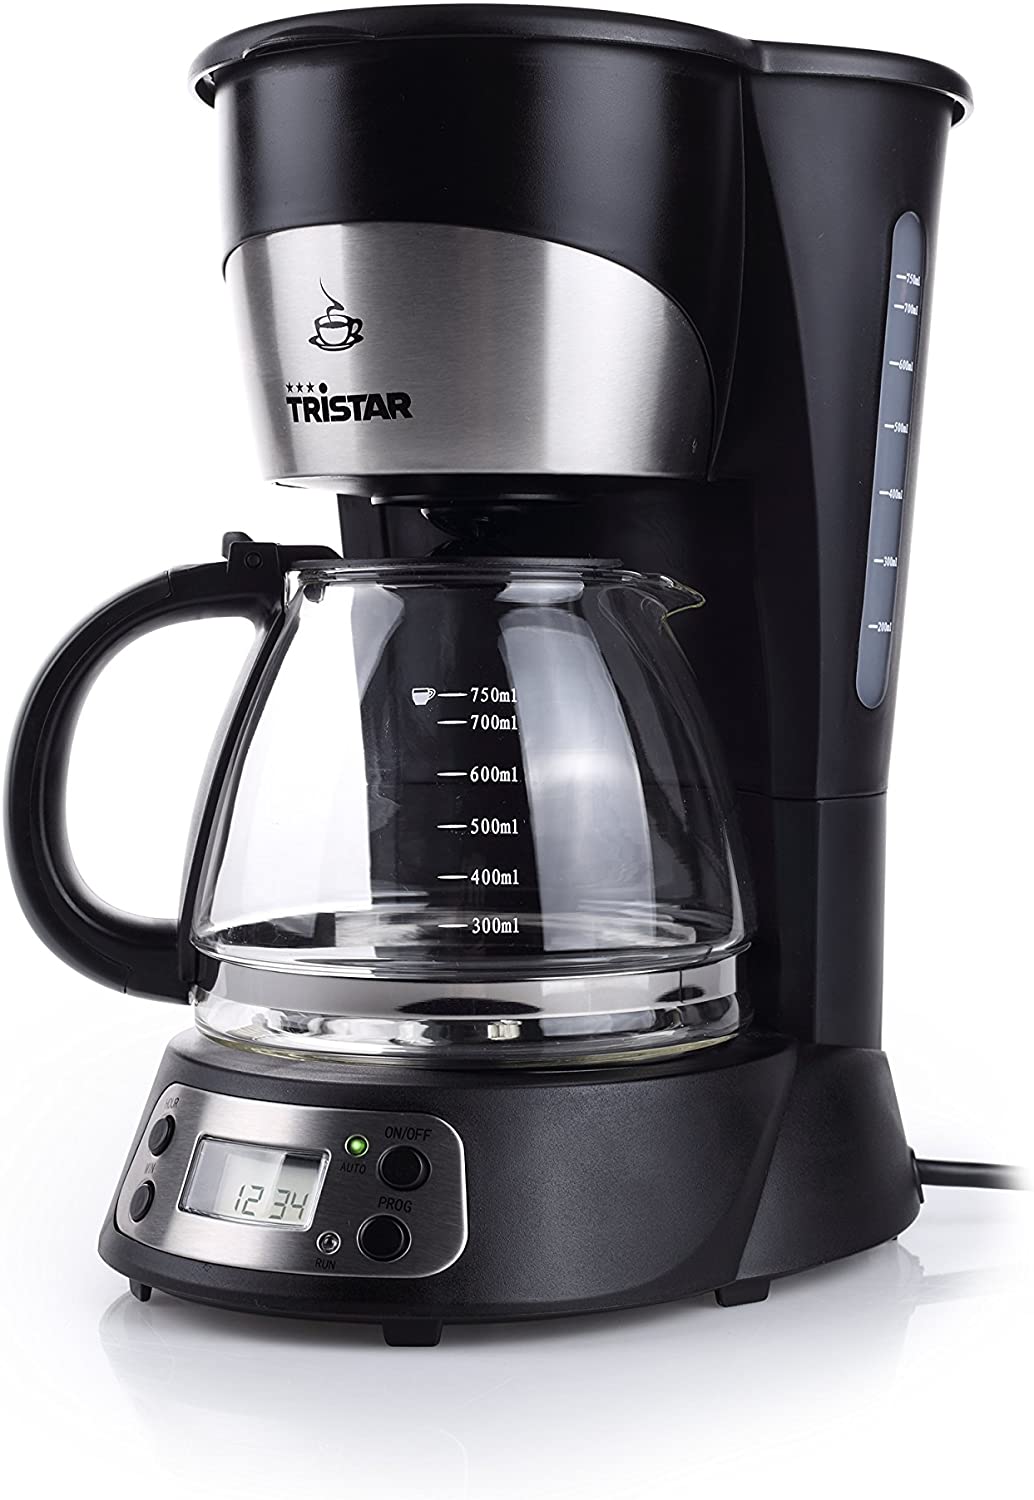 Tristar Coffee maker - coffee makers (freestanding, Ground coffee, Fully-auto, Coffee, Drip coffee maker, Black, Stainless steel)